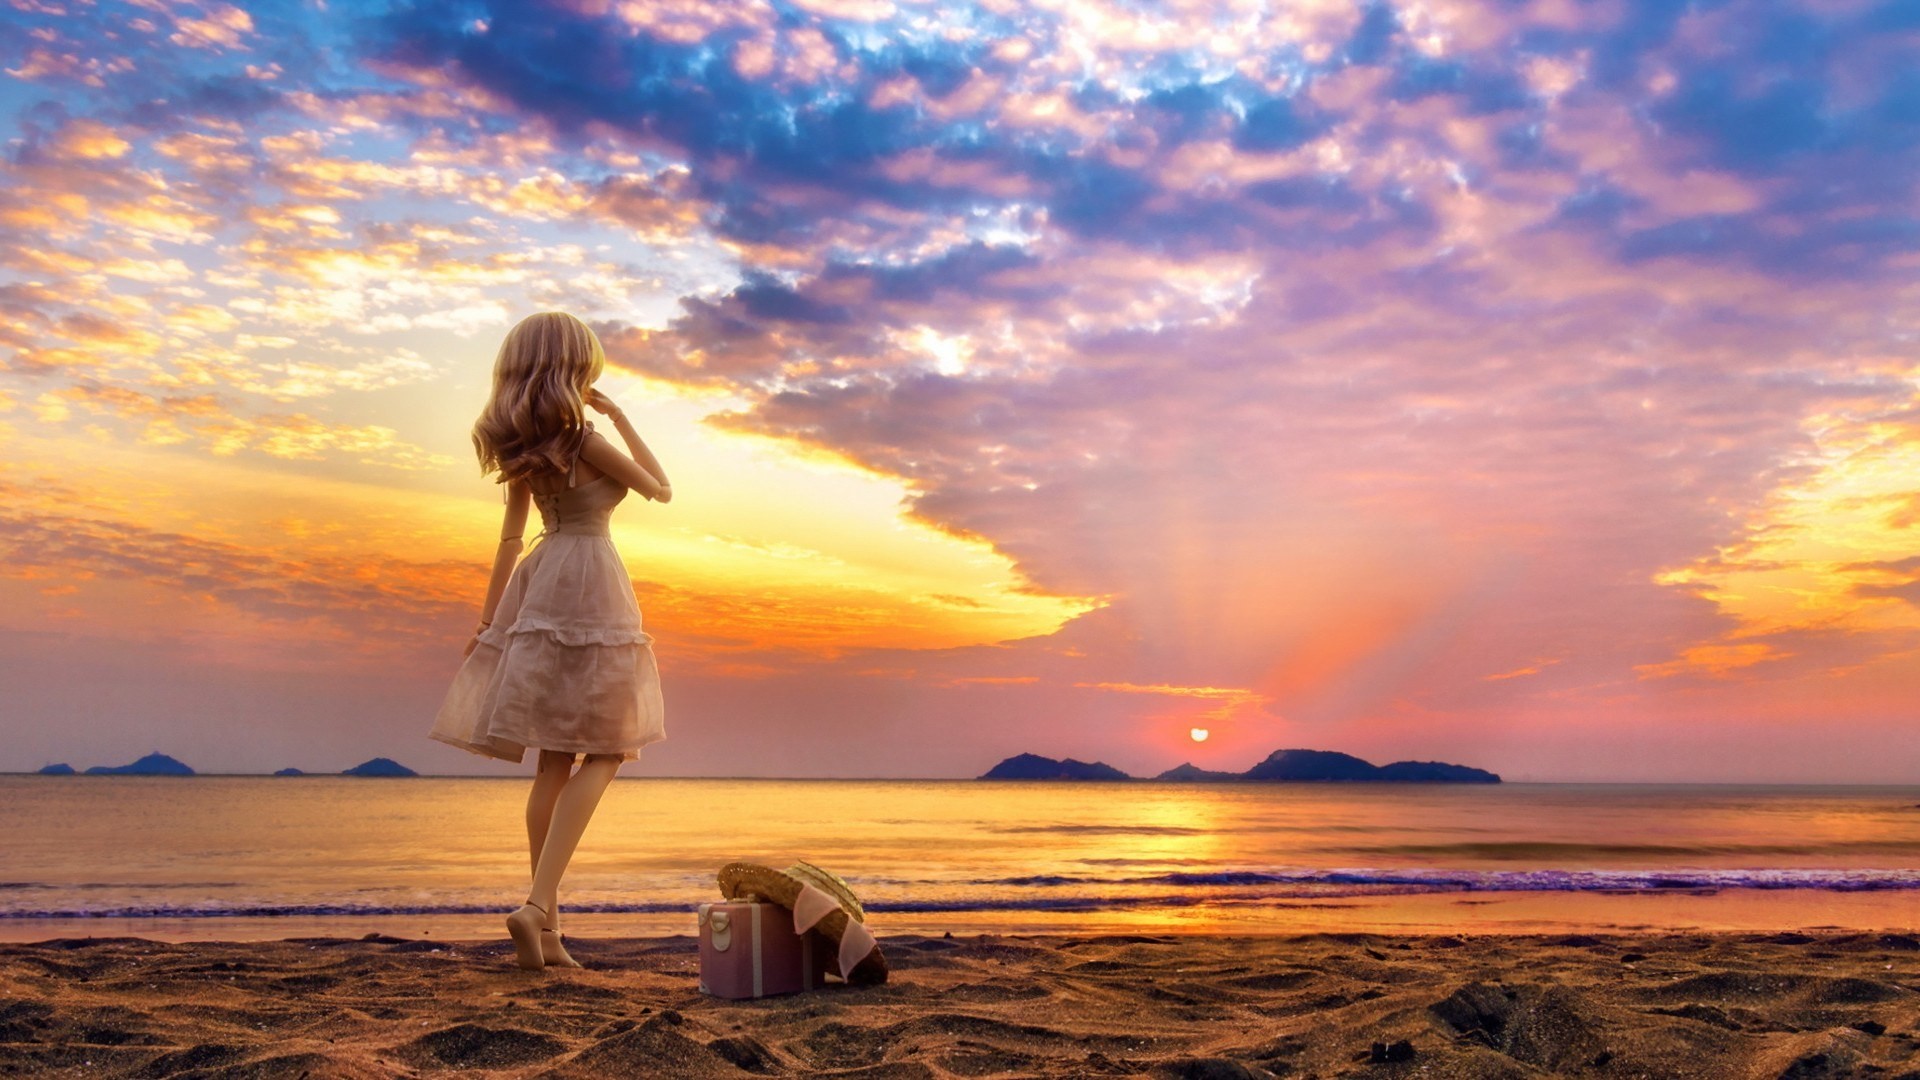 Blonde Long Hair Nature Water Doll Miniatures White Dress Sea Sand Beach Sunset Clouds Hat Suitcase  1920x1080